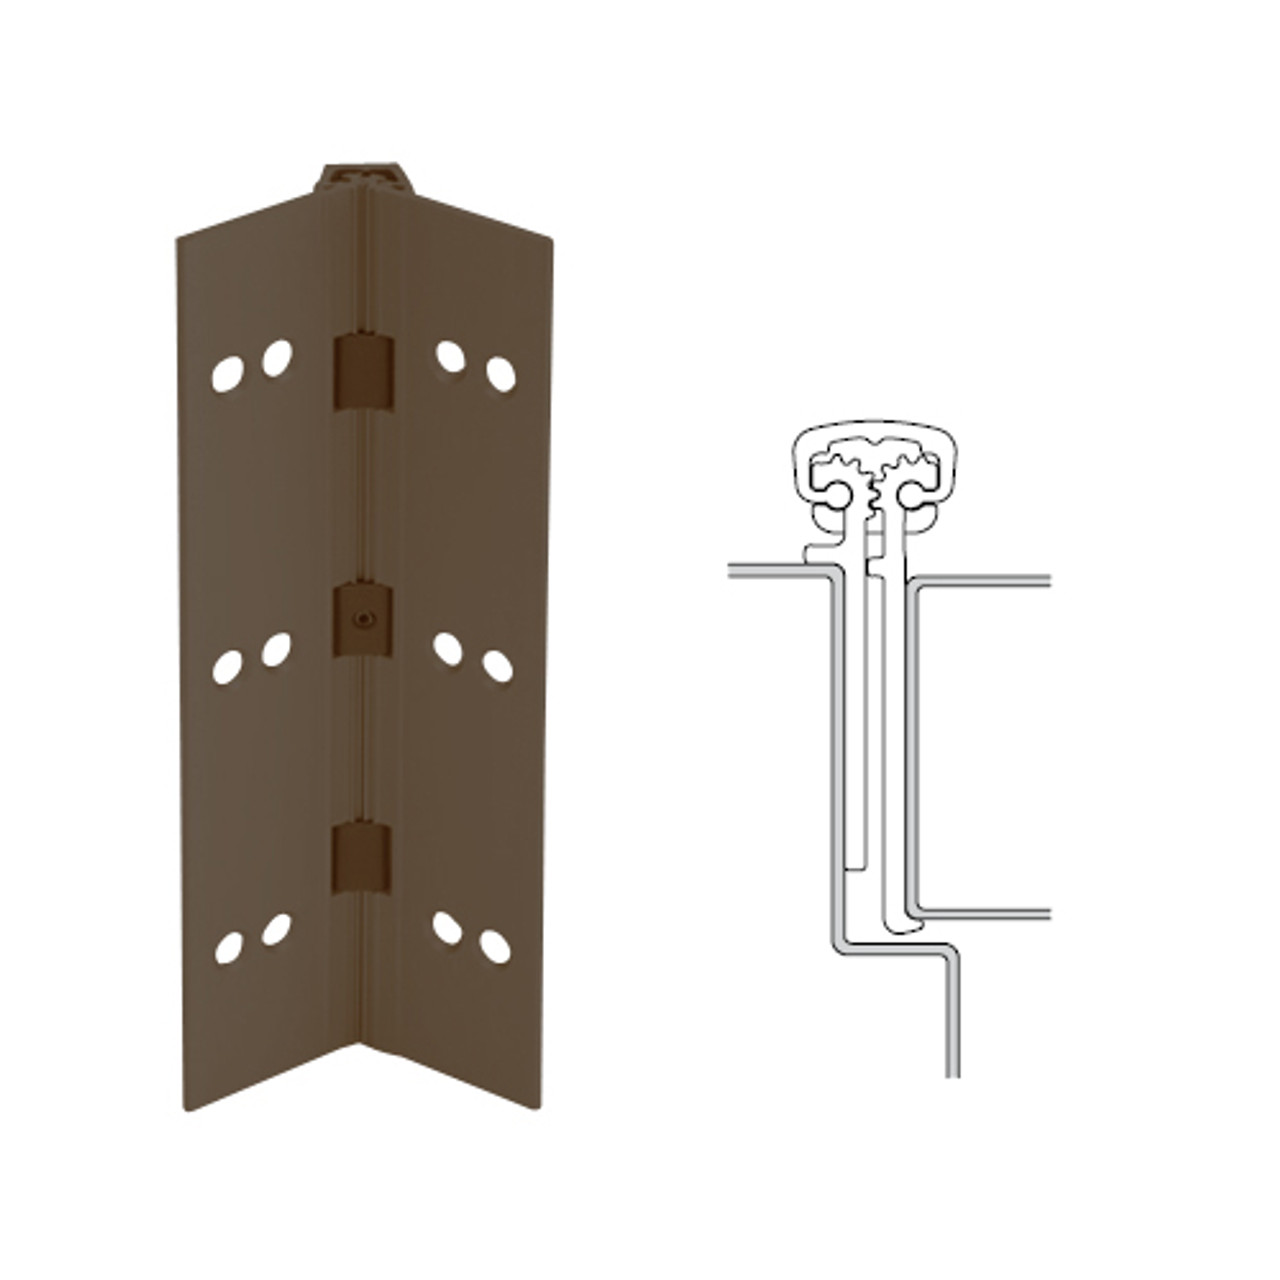 114XY-313AN-95-EPT IVES Full Mortise Continuous Geared Hinges with Electrical Power Transfer Prep in Dark Bronze Anodized